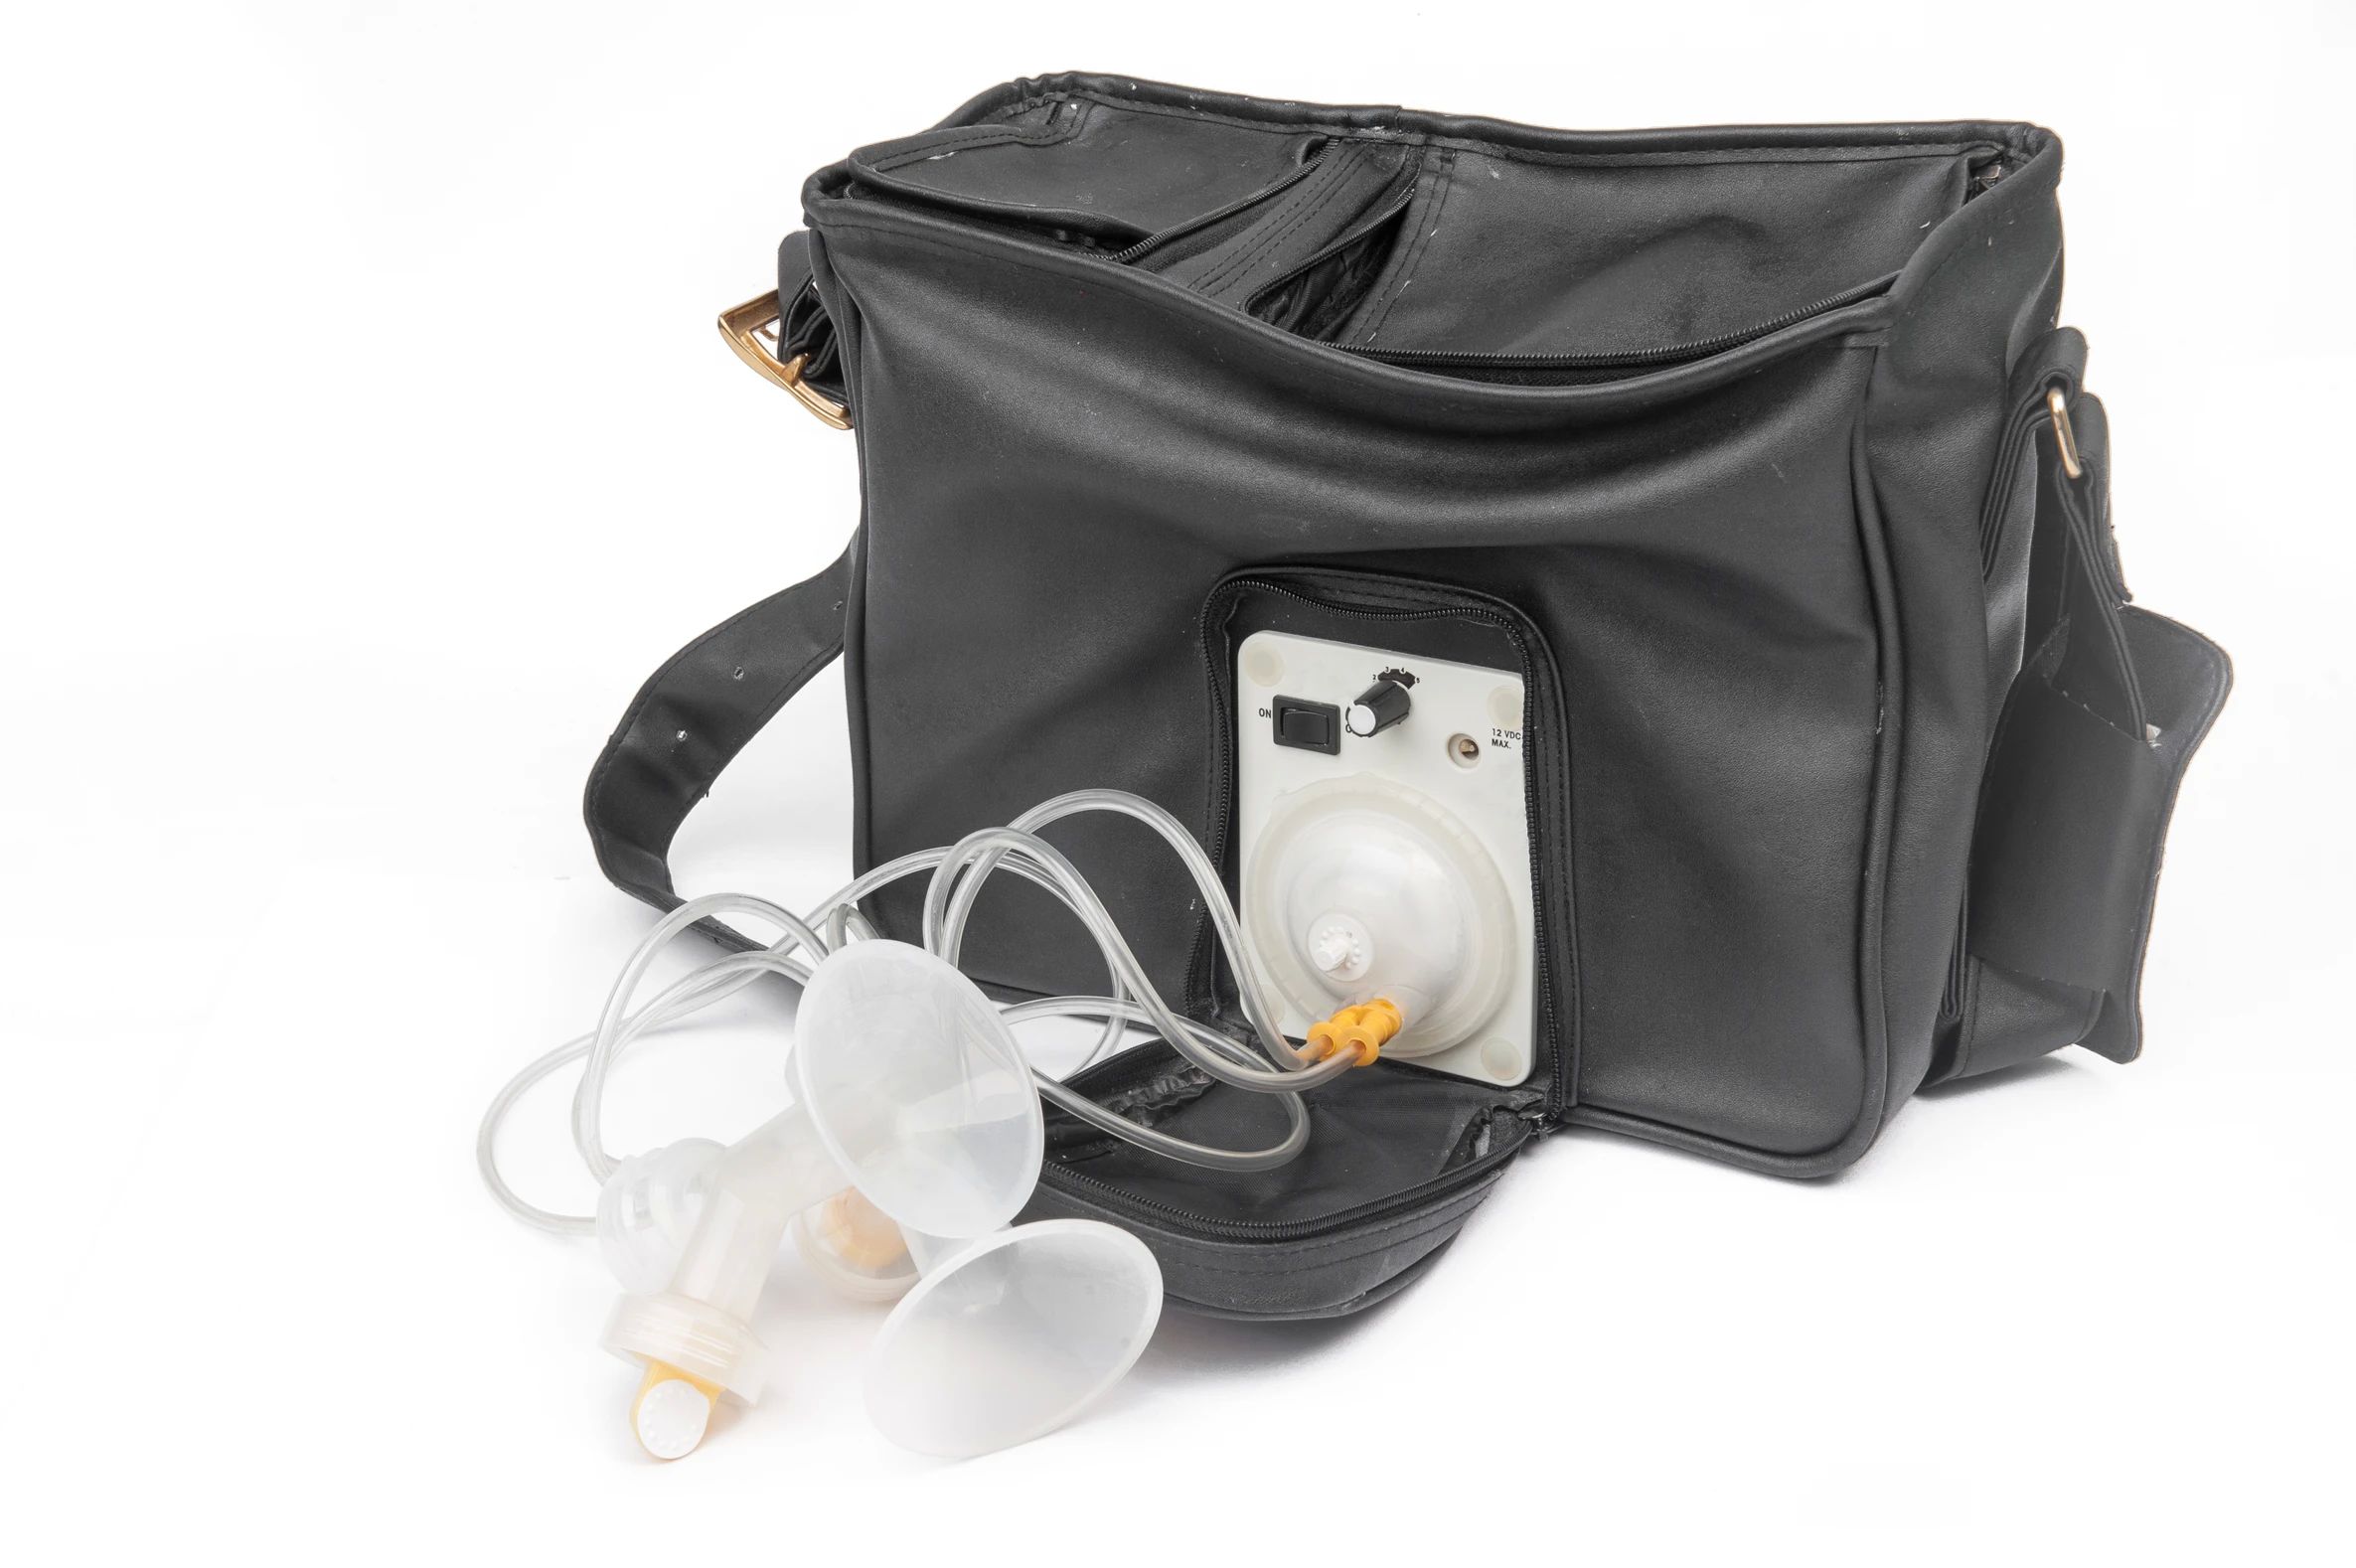 I Got a Free Breast Pump, Now What?